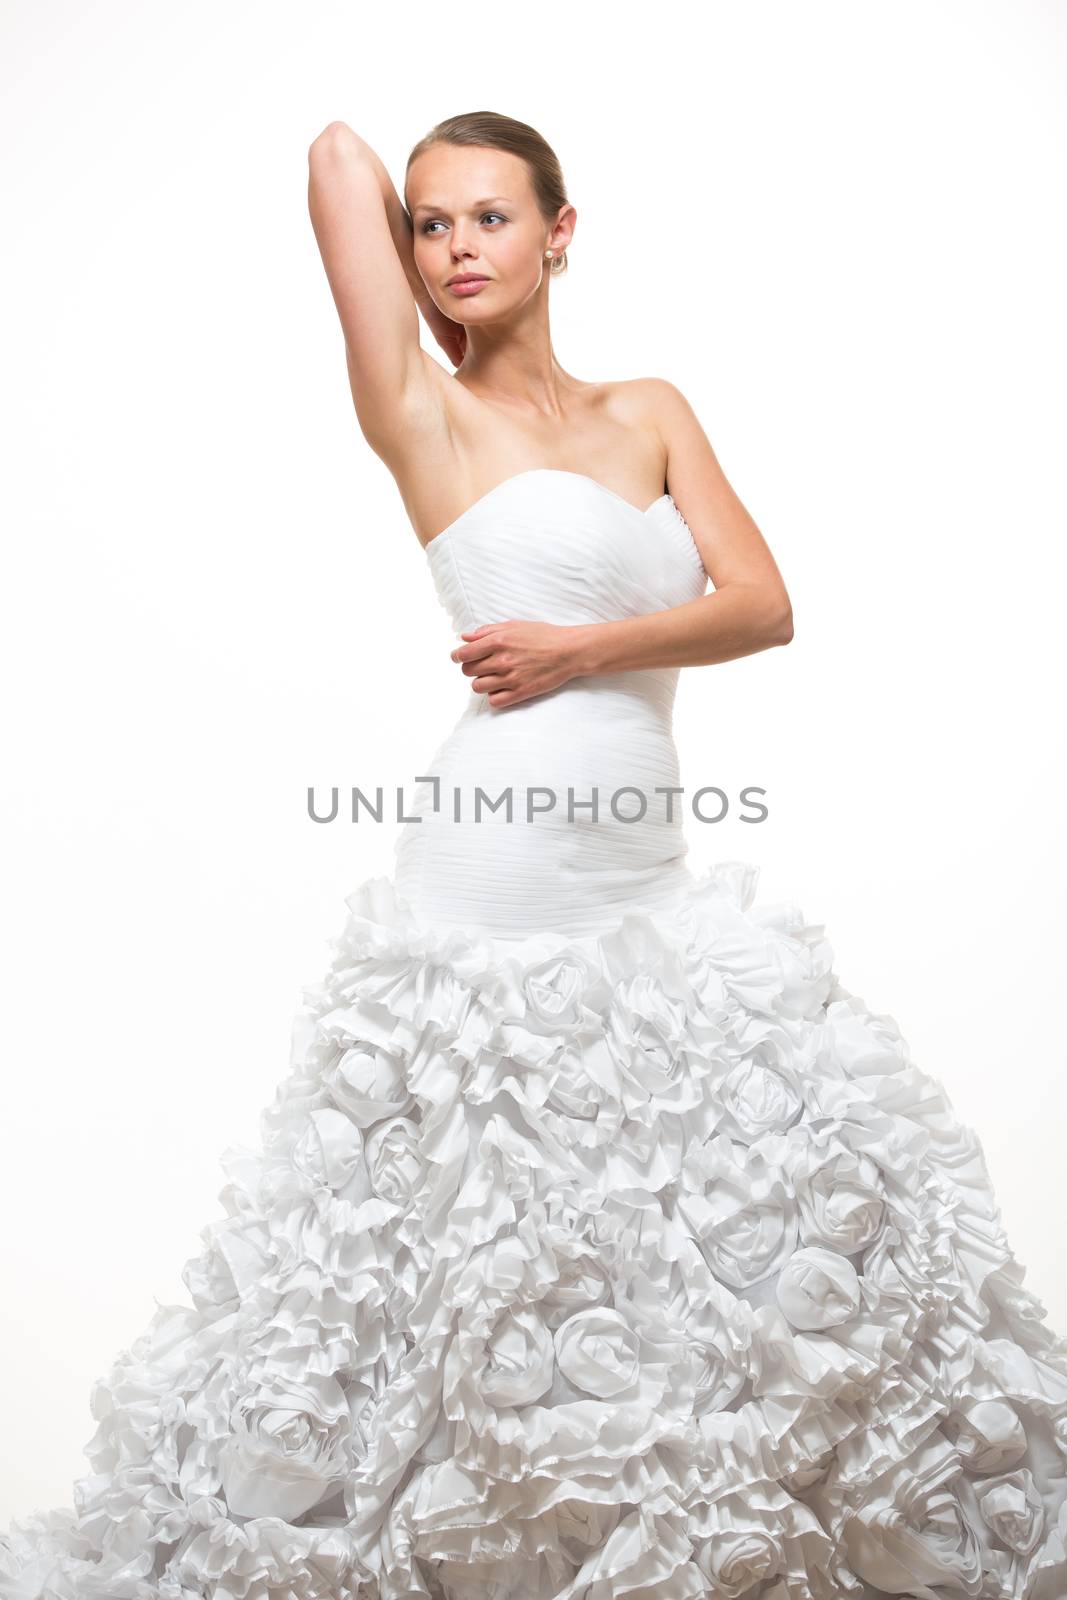 Gorgeous bride in her wedding dress on white background by viktor_cap